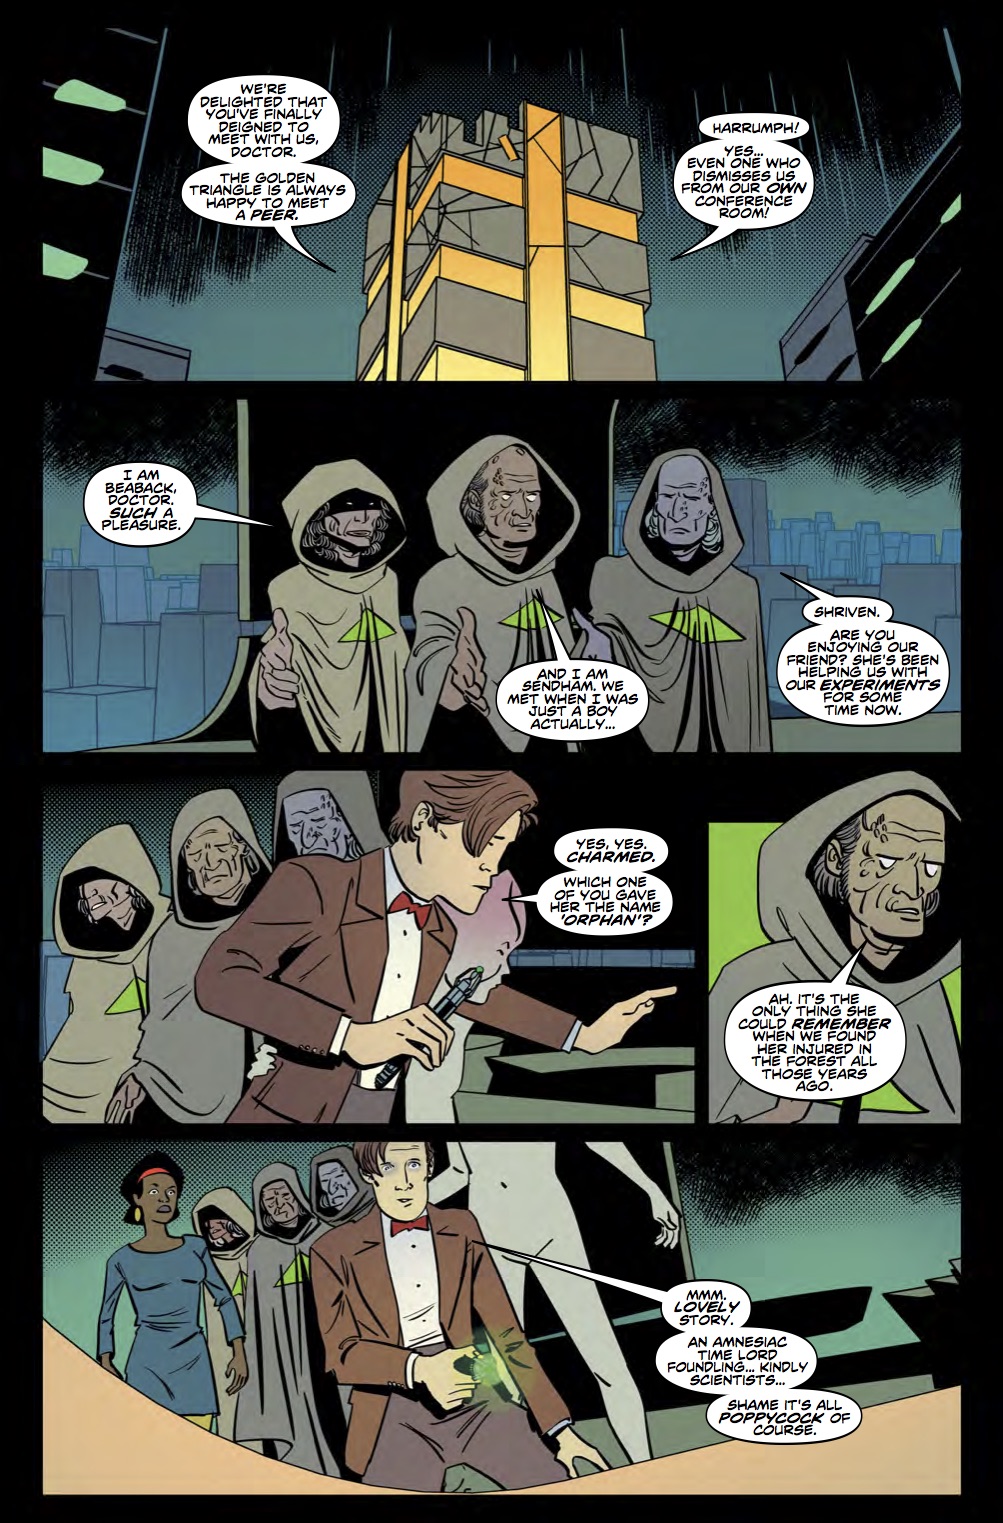 Eleventh_Doctor_3_11_Page 4